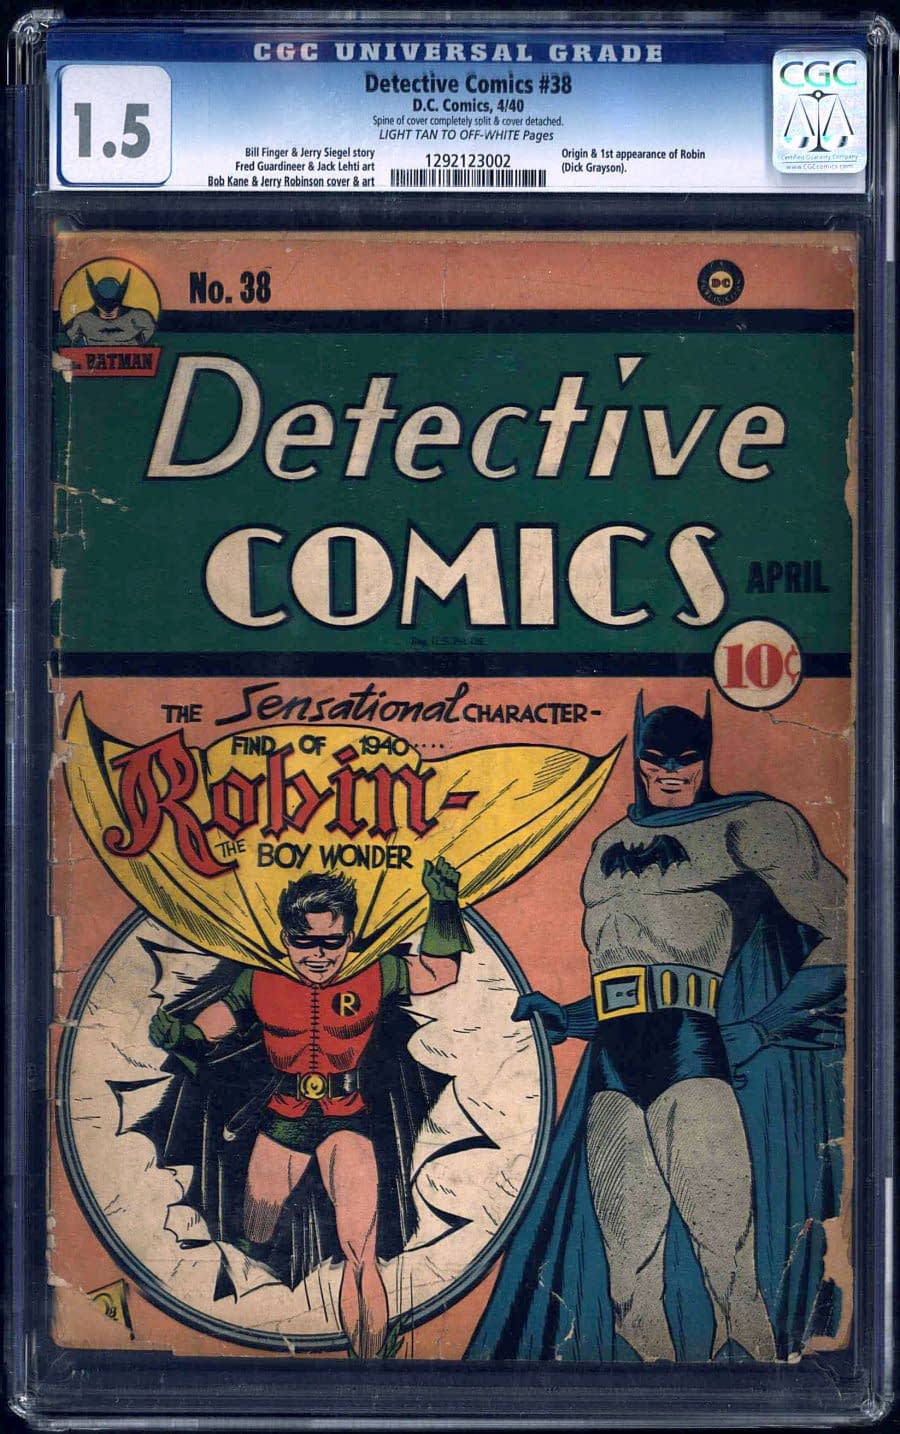 Detective Comics #38: First Appearance Of Robin Always Breaks Records